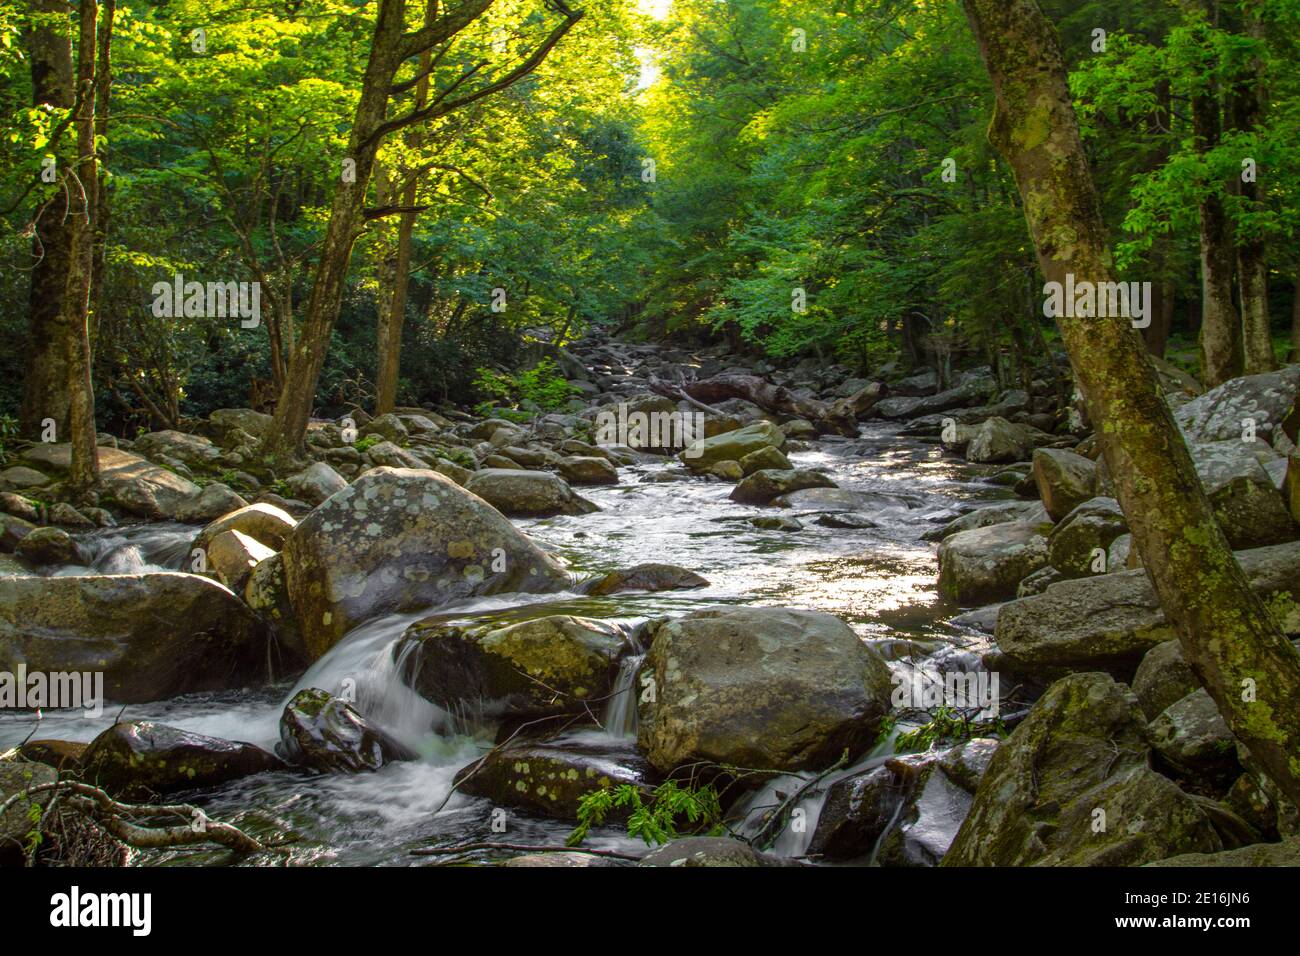 Smoky Mountain Landscape. Stream on a rocky river flows through the mountain wilderness of the Great Smoky Mountains National Park in Tennessee. Stock Photo